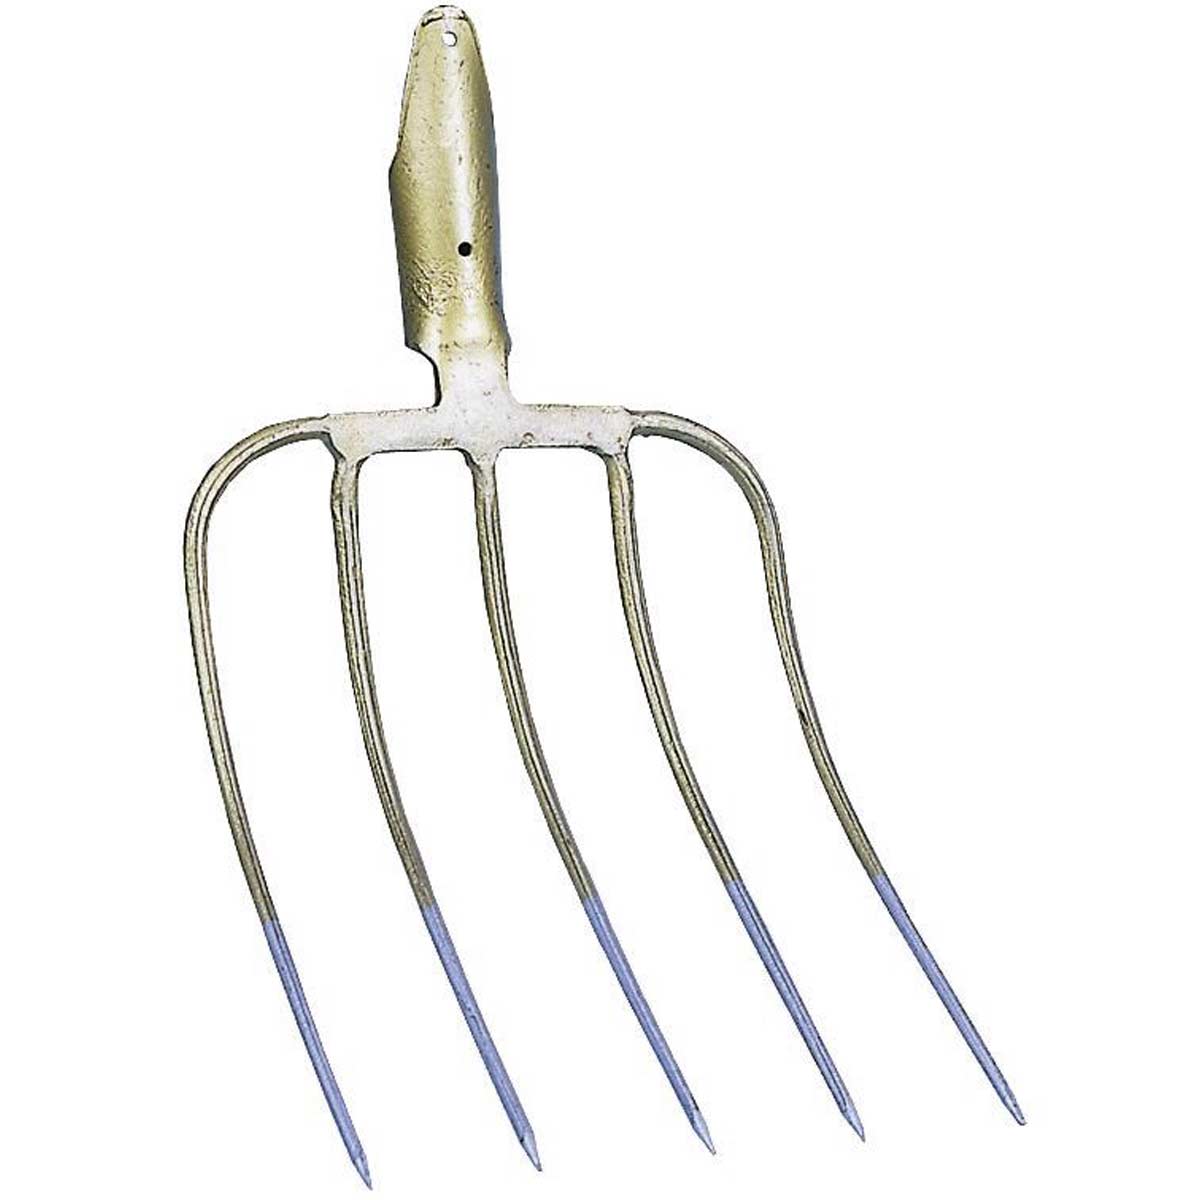 Litter fork 5 tines31 x 24 cm without handle